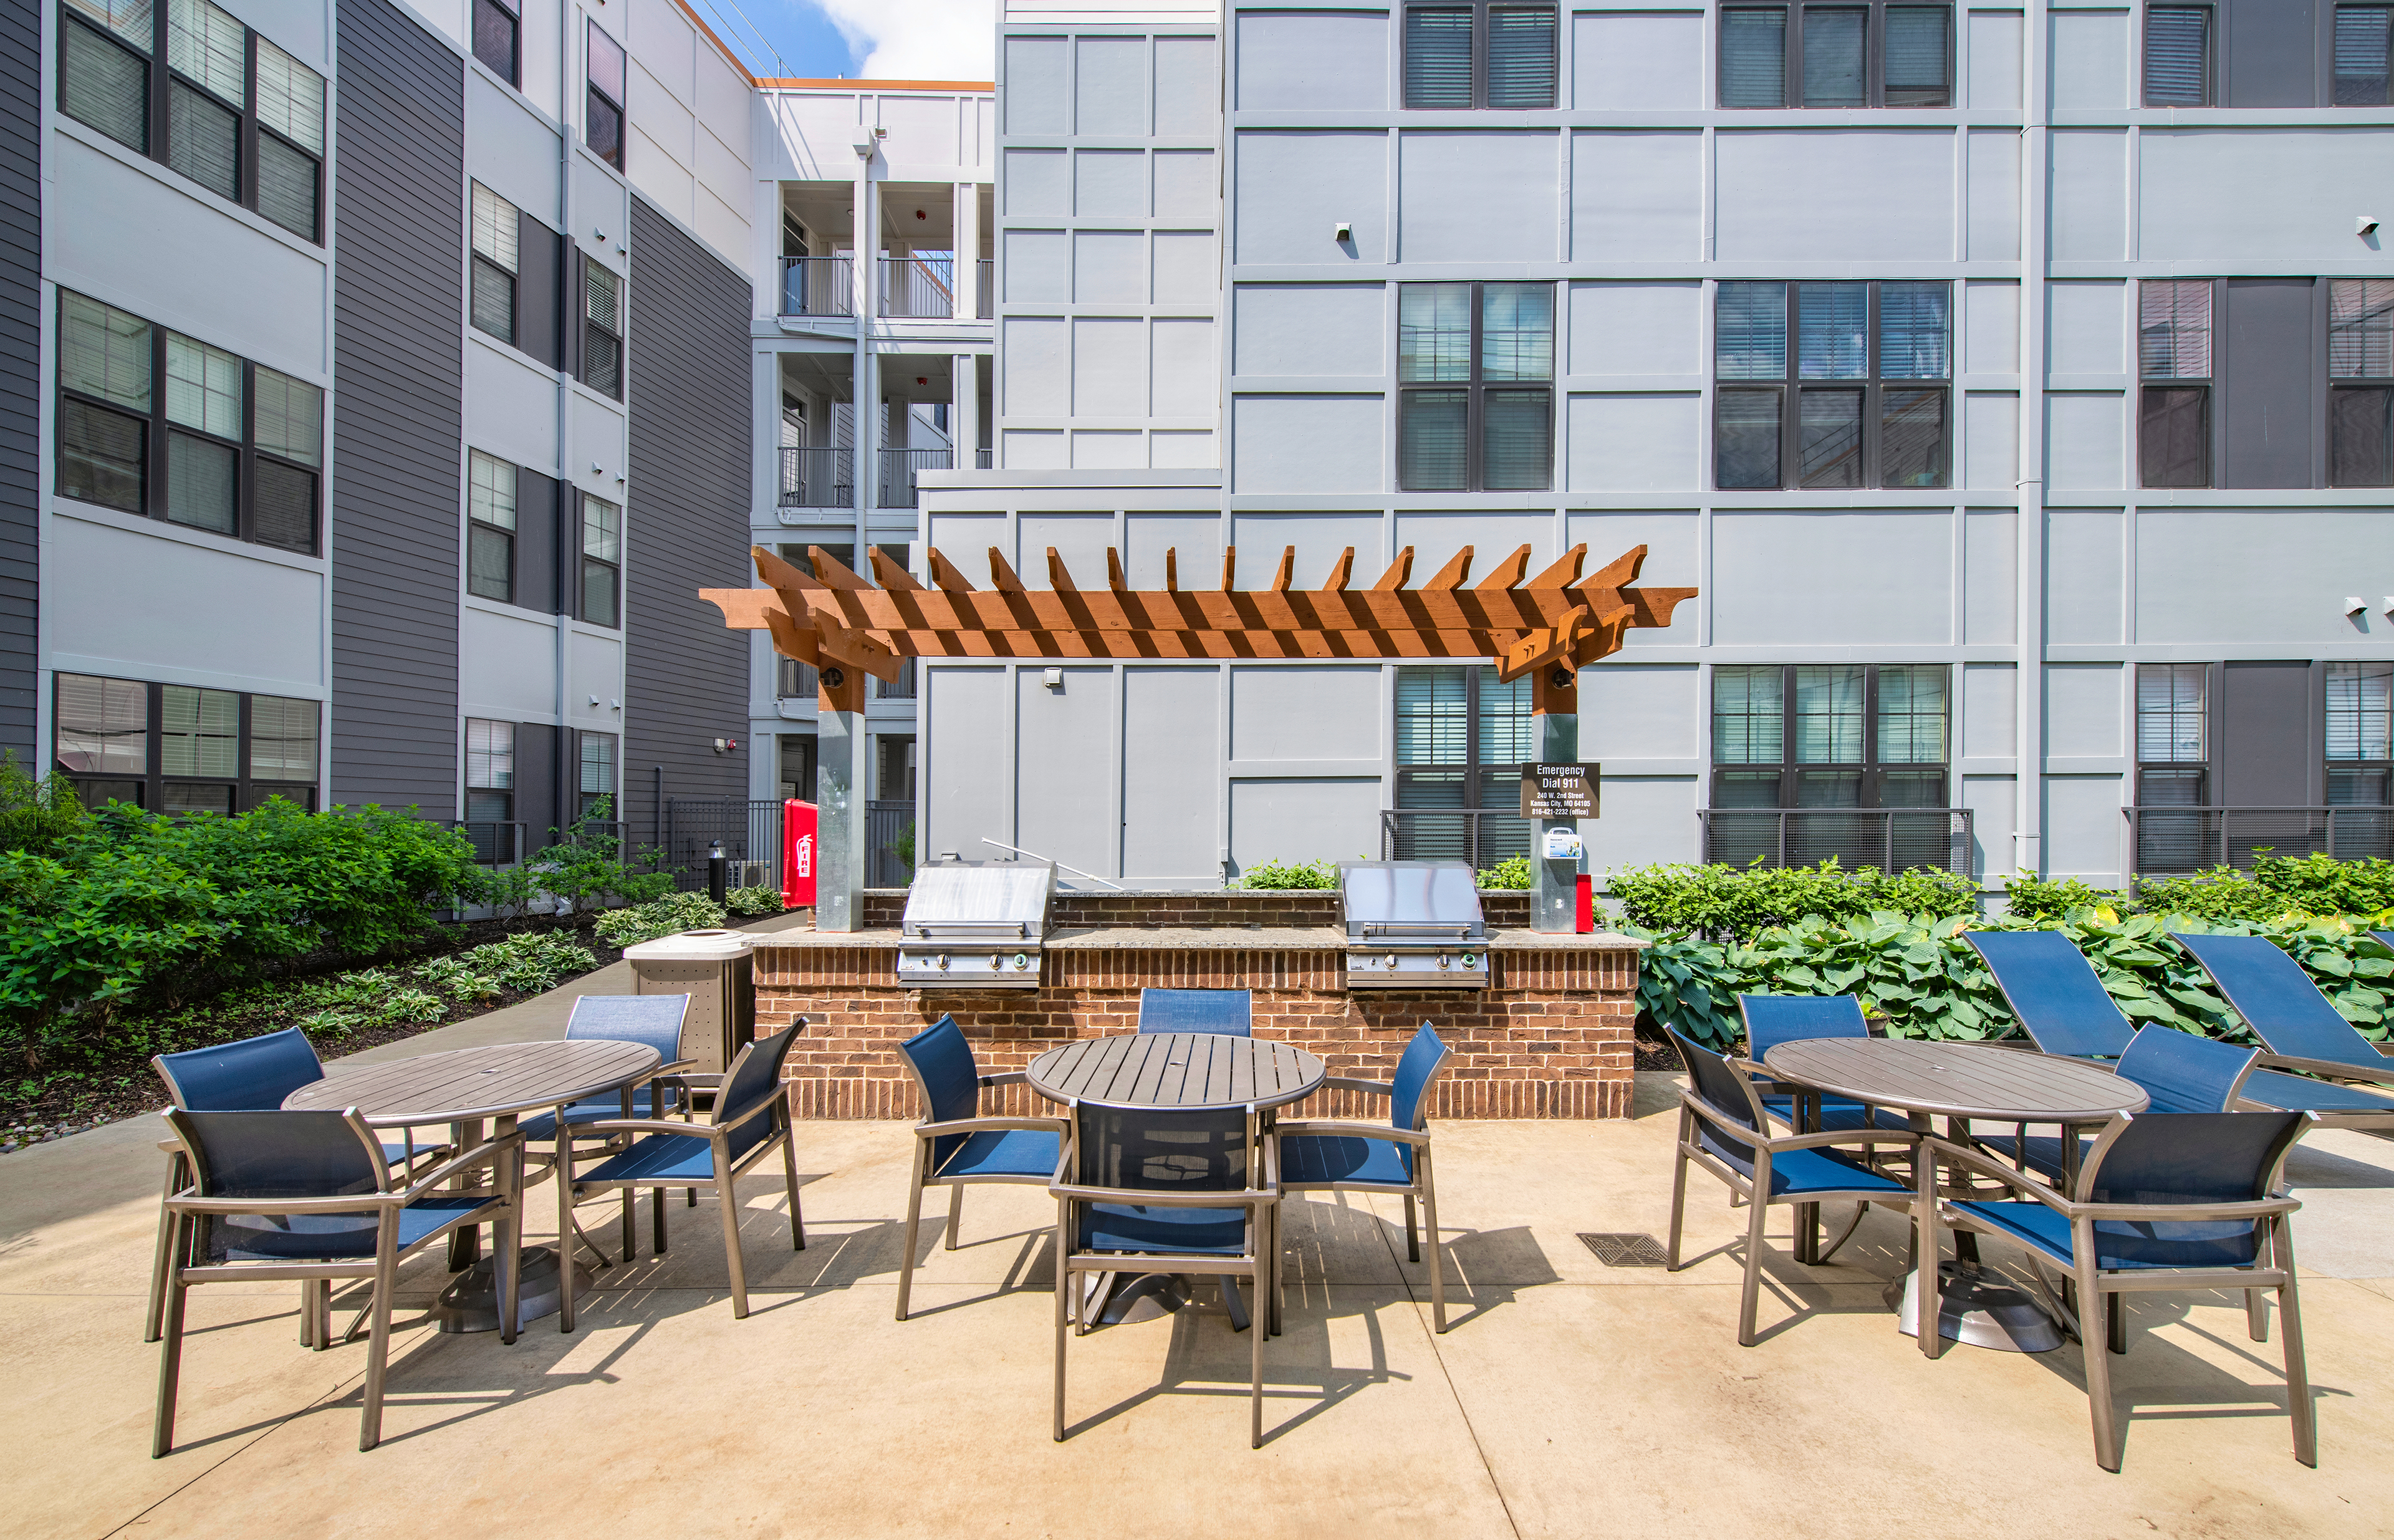 Outdoor double grilling station with patio tables and chairs at Market Station luxury apartments in Kansas City, MO